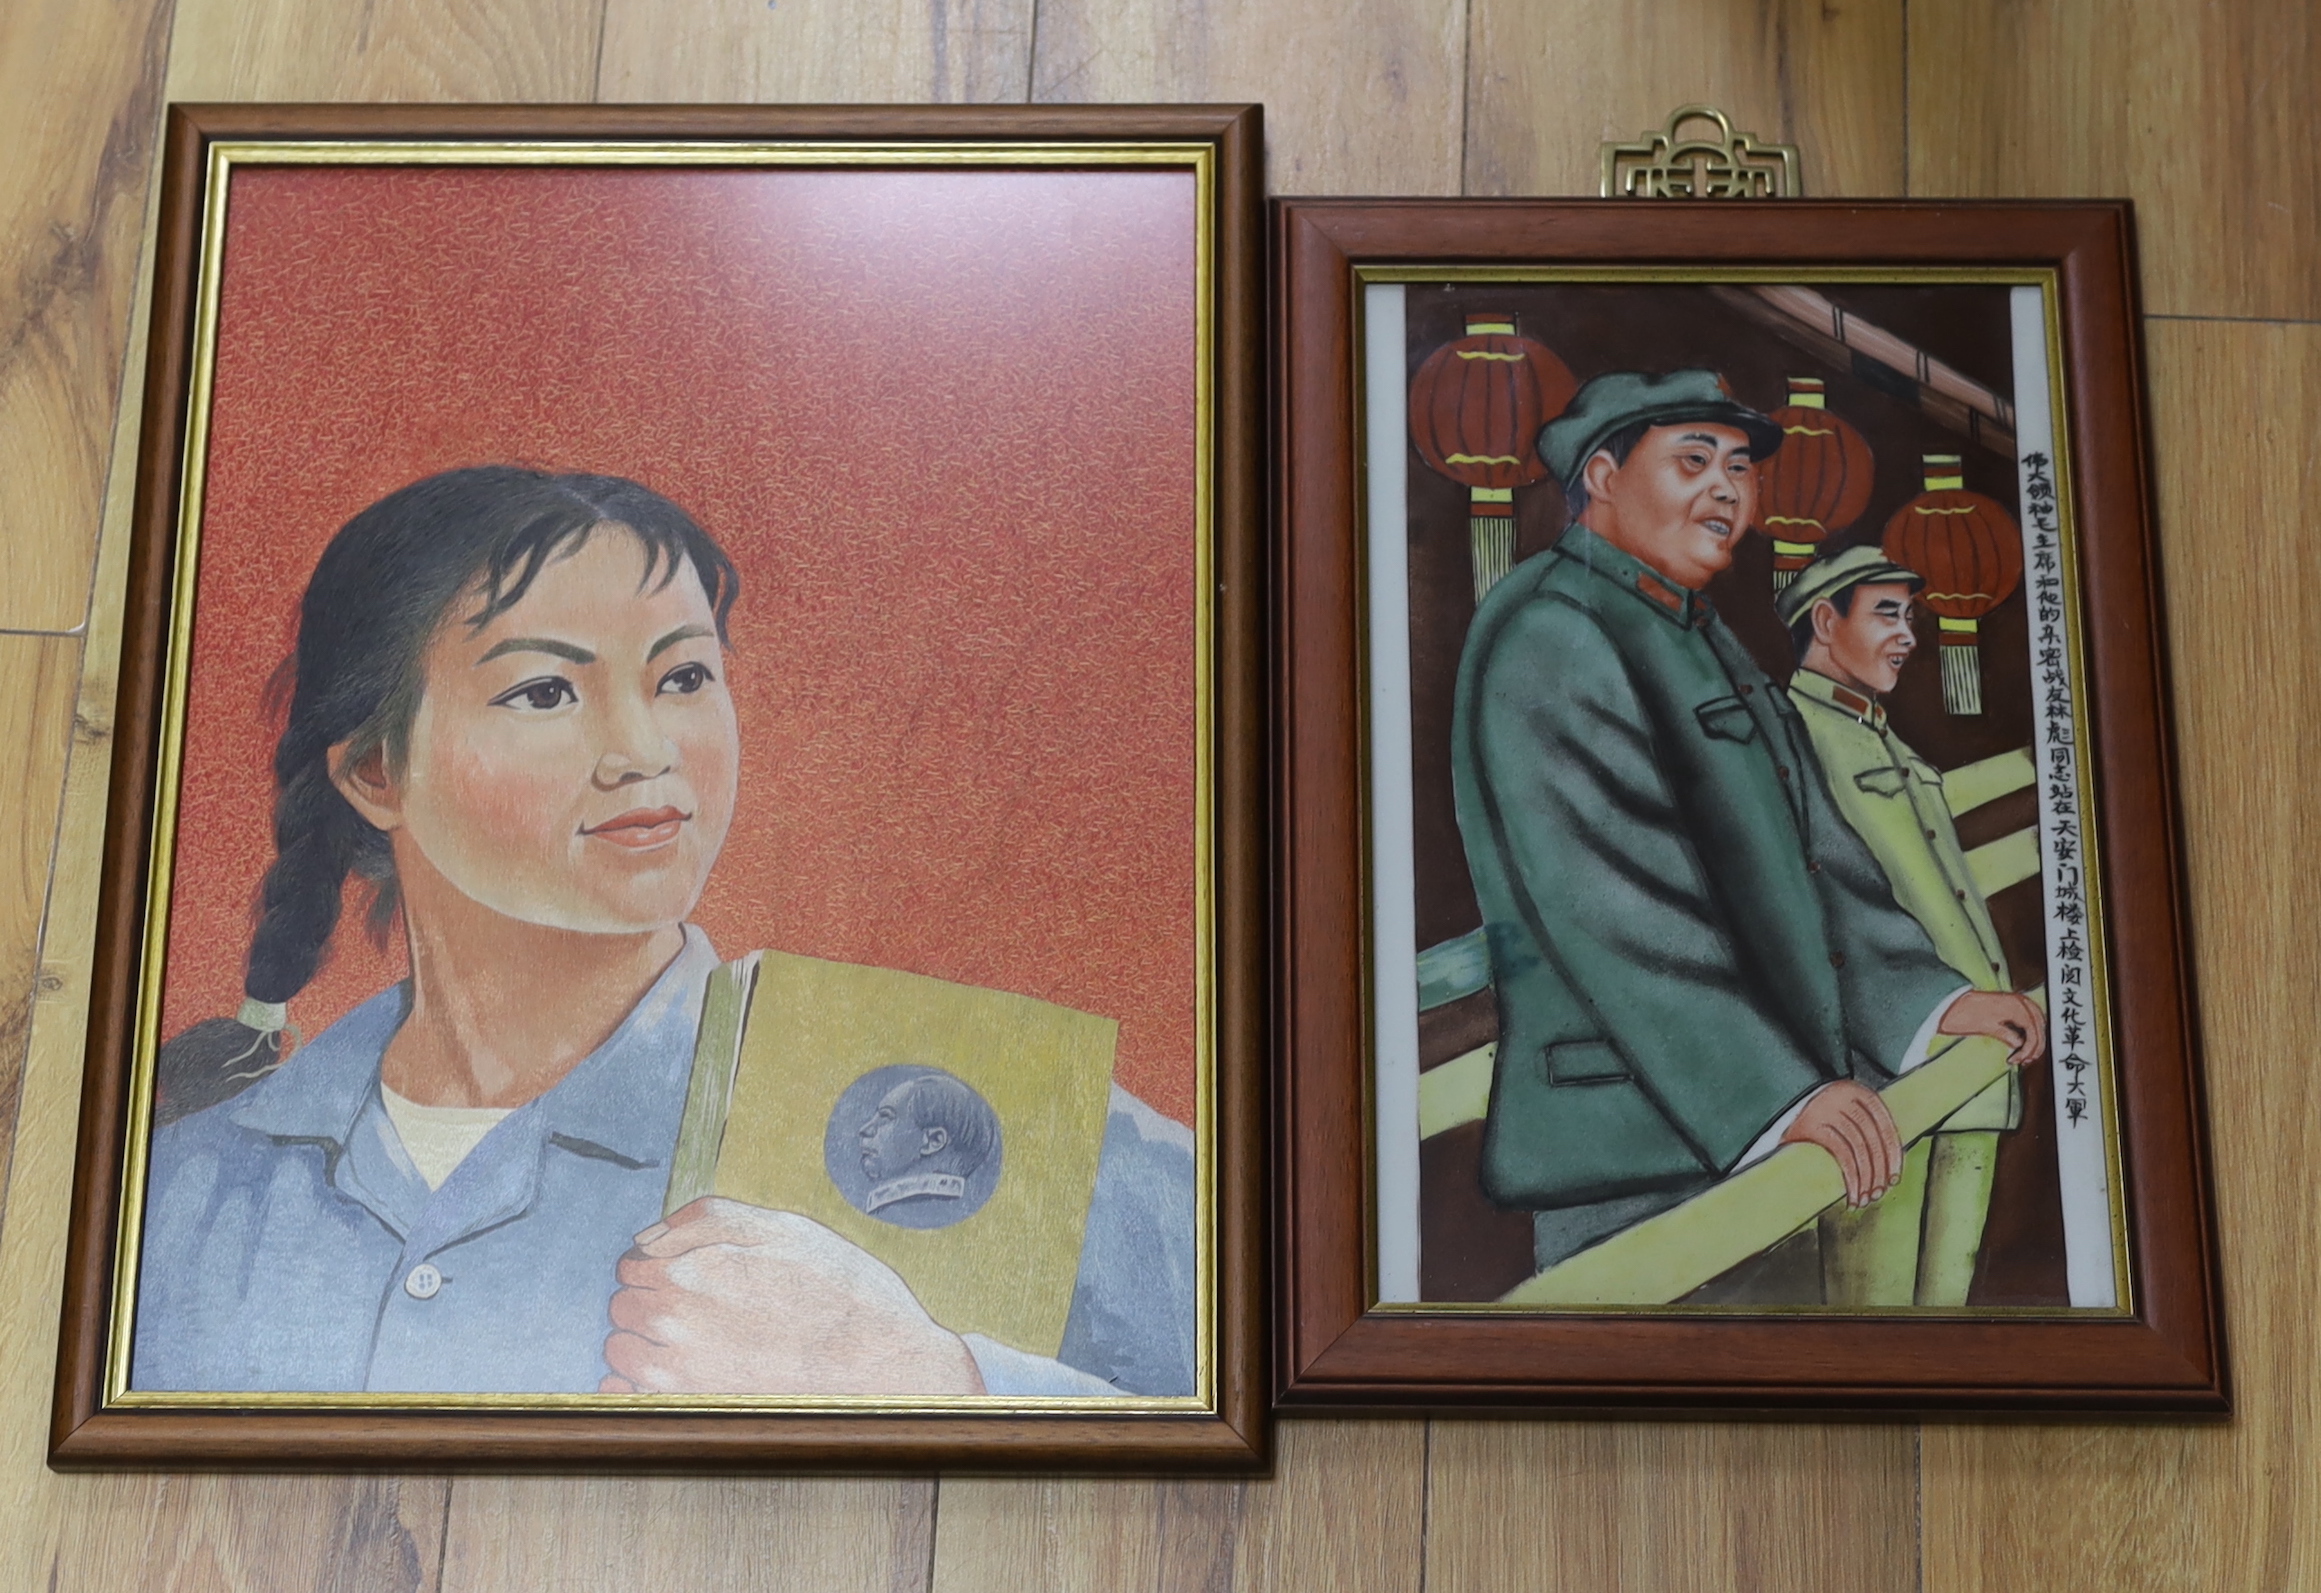 A framed Cultural Revolution embroidery picture of a girl holding a book and a porcelain tile of